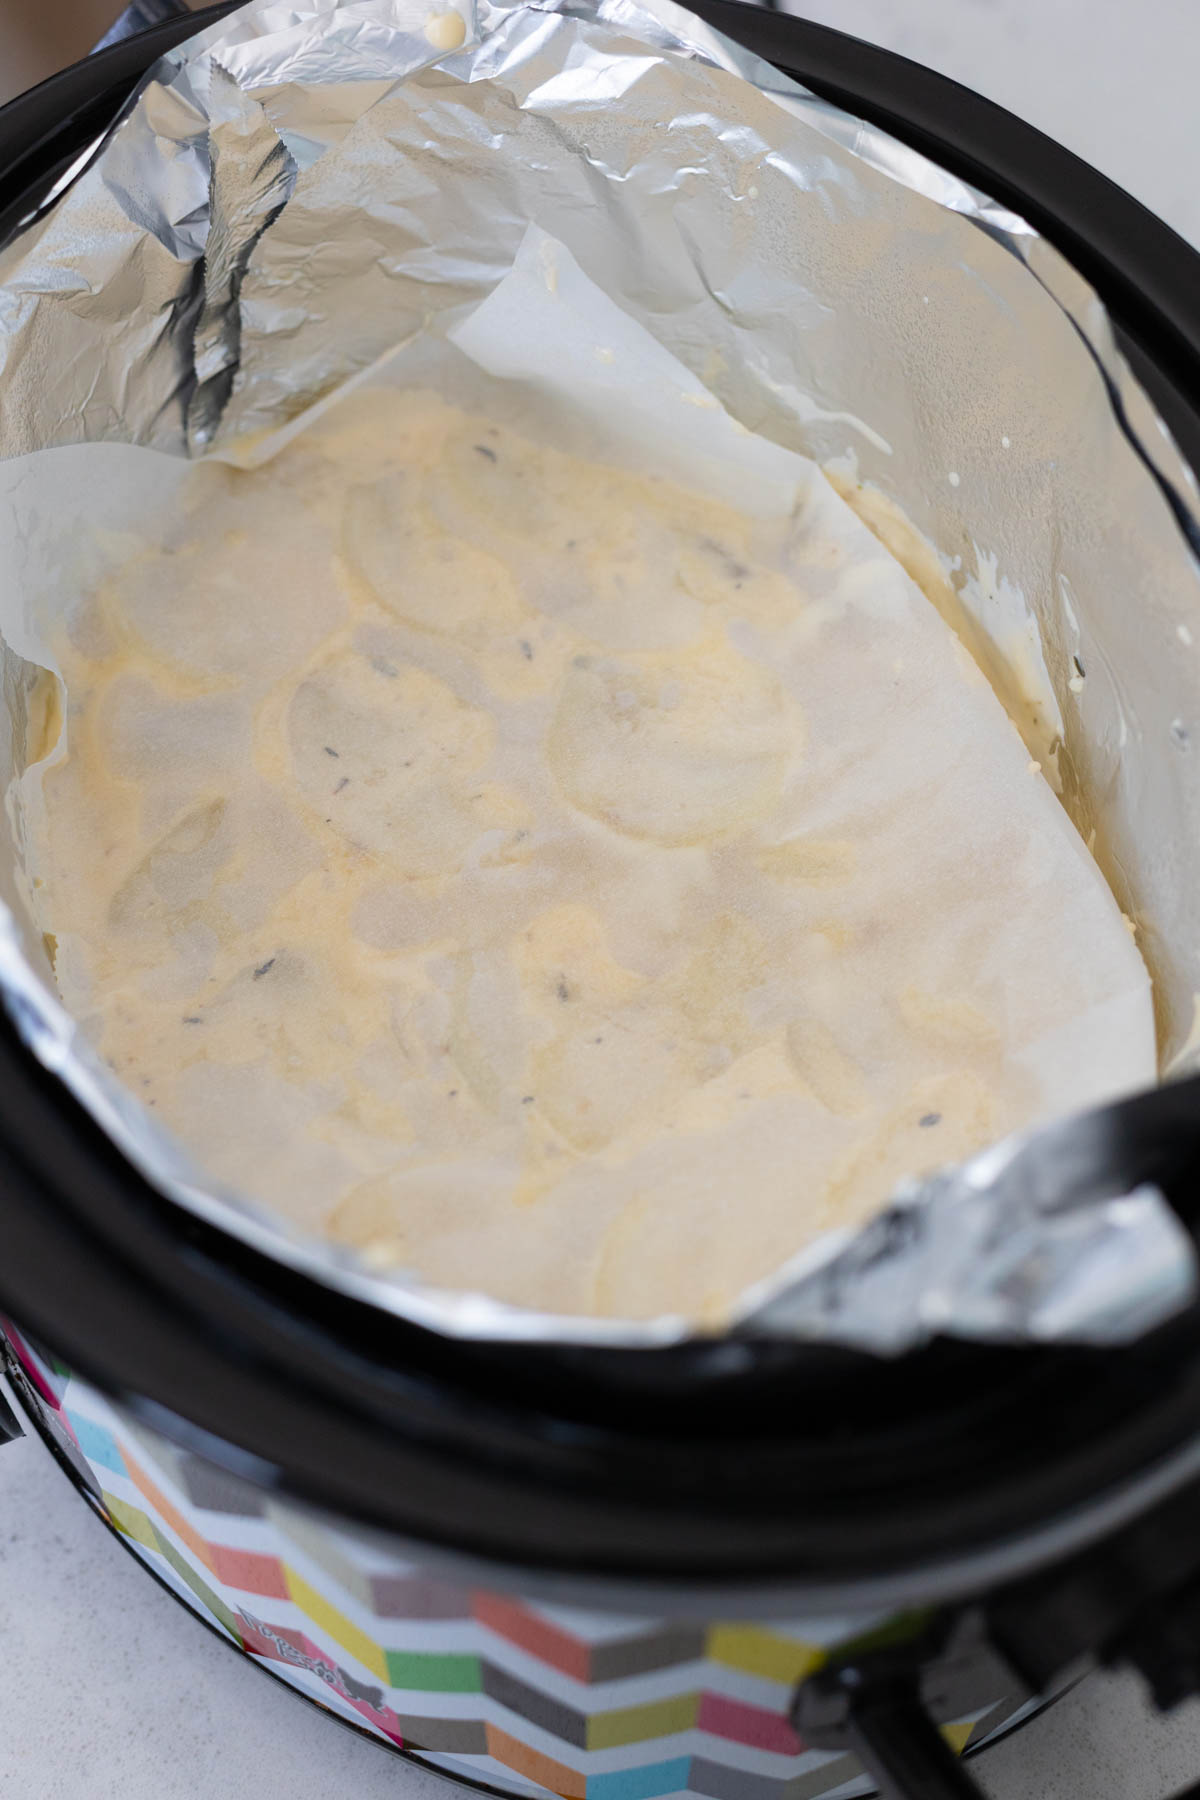 A piece of parchment that has butter rubbed on it has been smoothed over the top of the potatoes in the slowcooker.